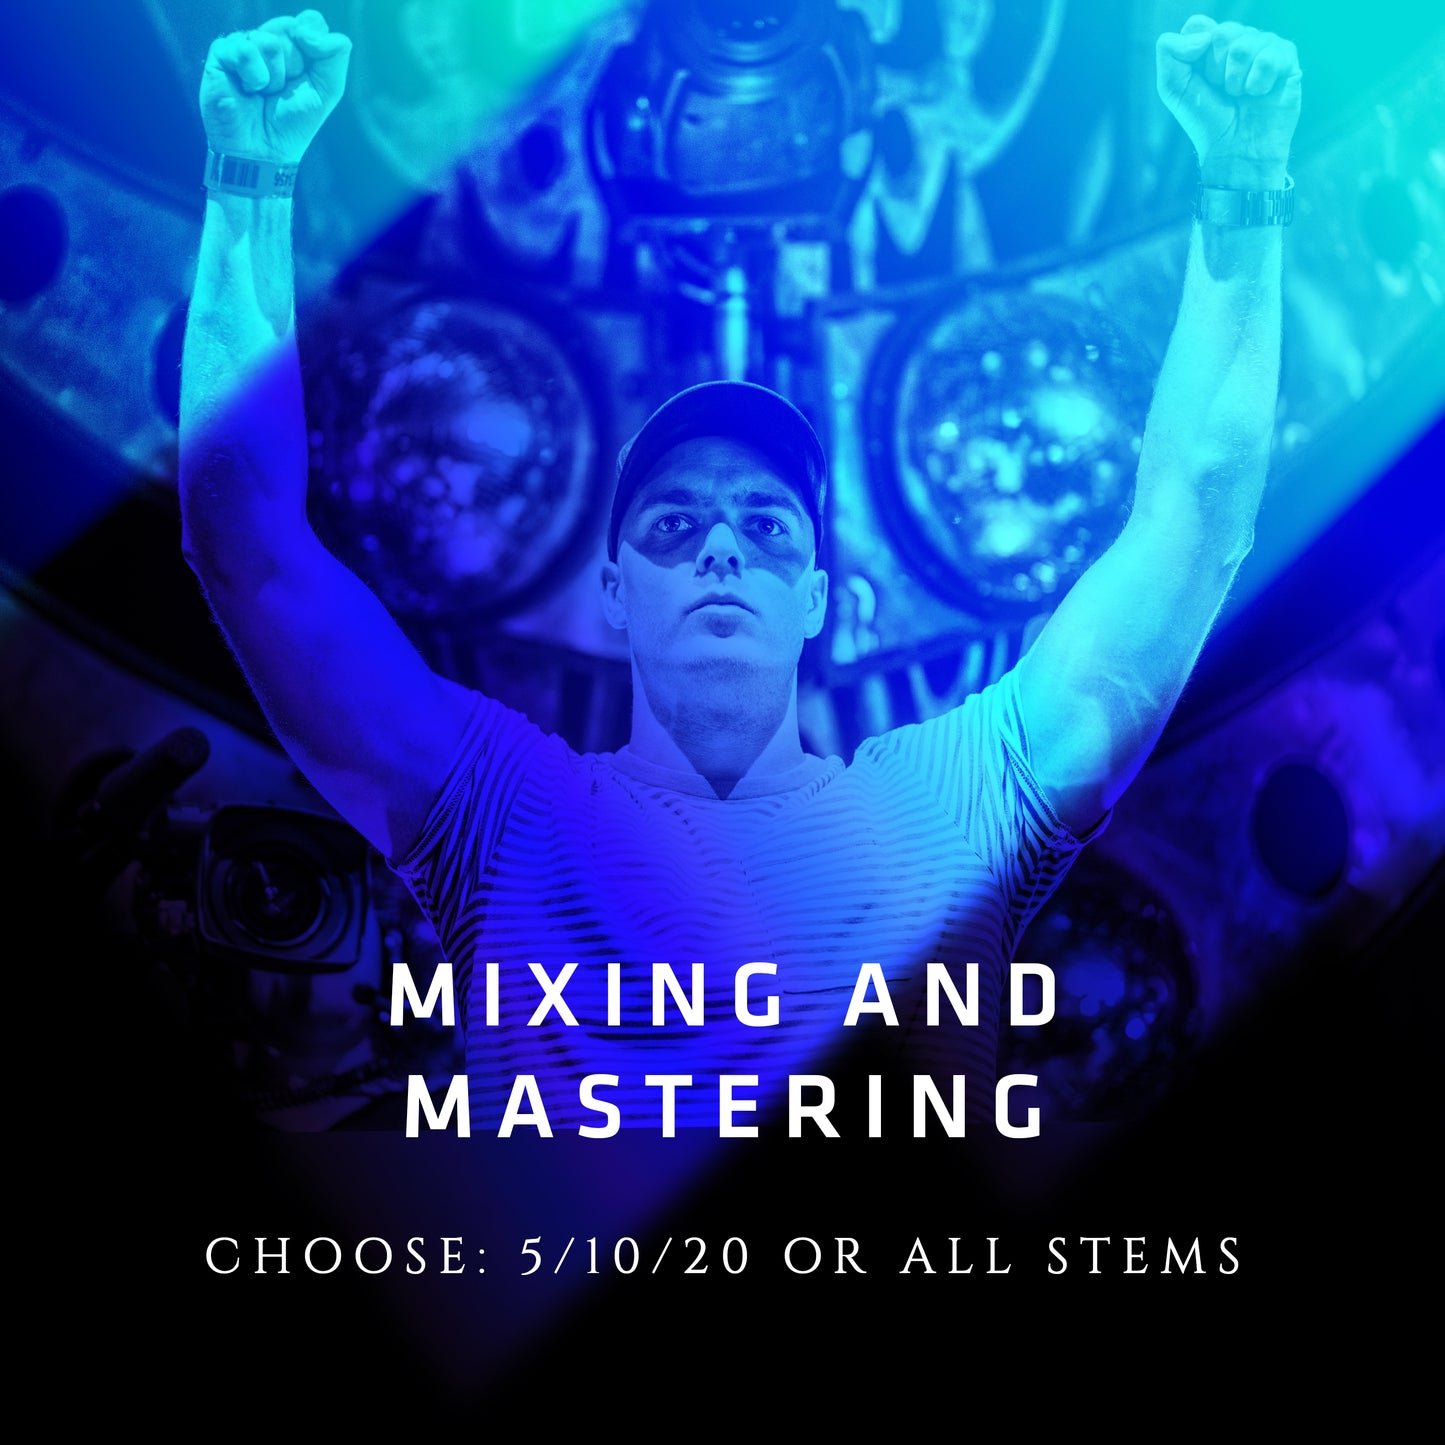 Mixing & mastering by MYST (20 Stems)